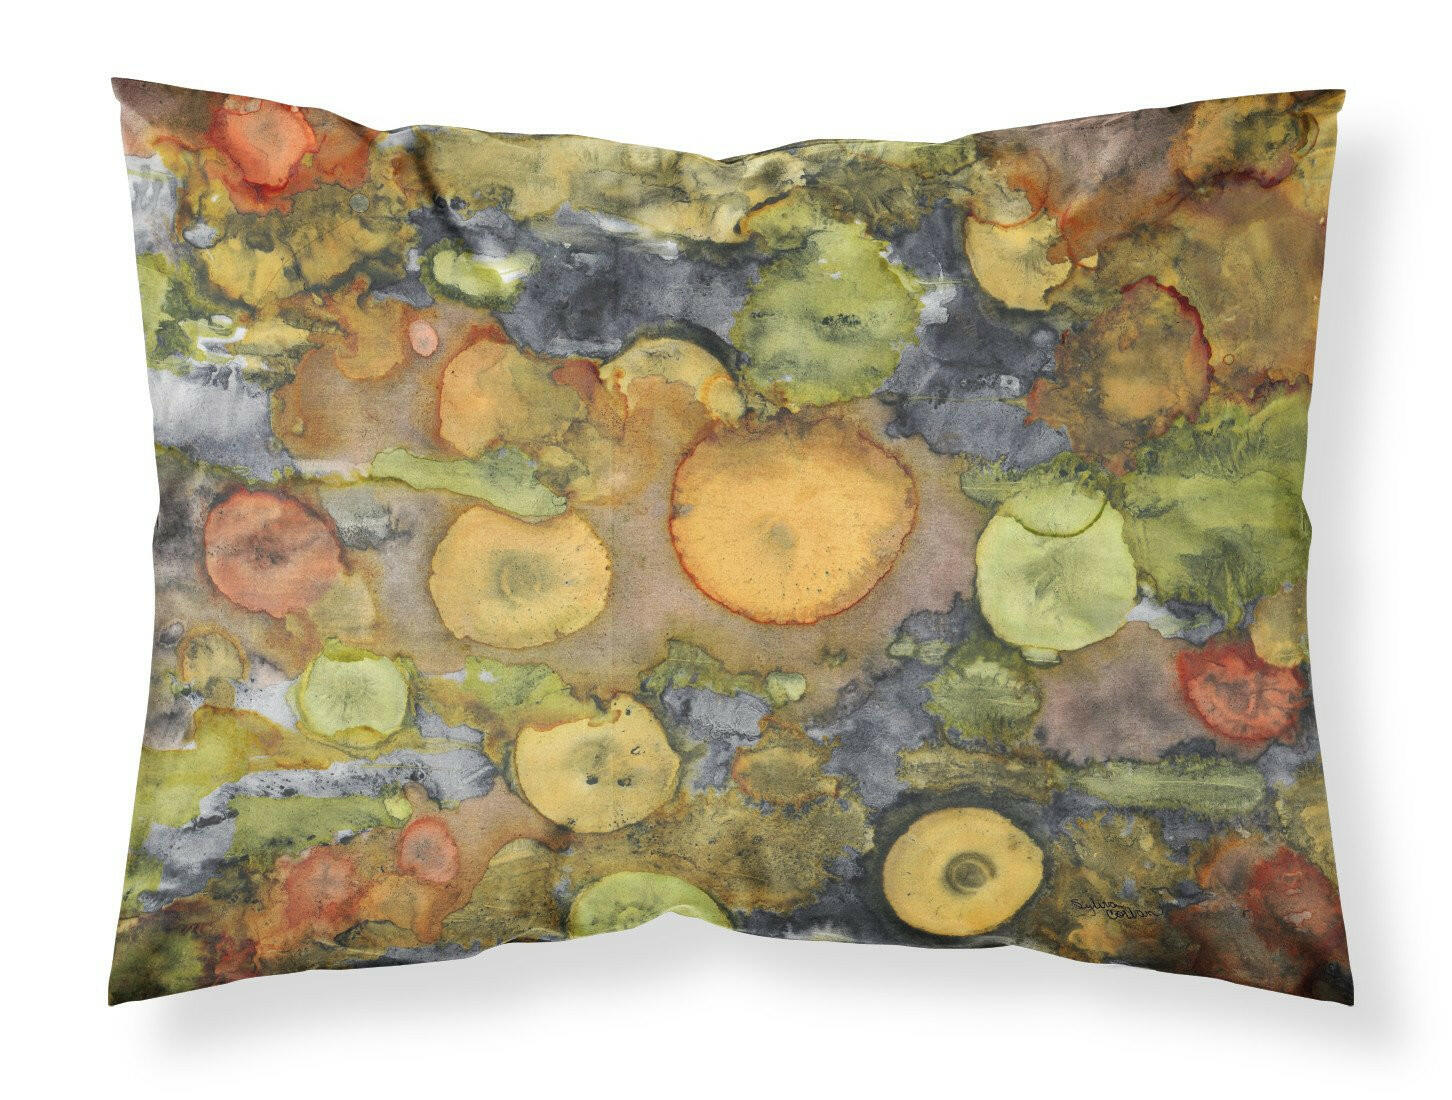 Abstract with Mother Earth Fabric Standard Pillowcase 8966PILLOWCASE by Caroline's Treasures